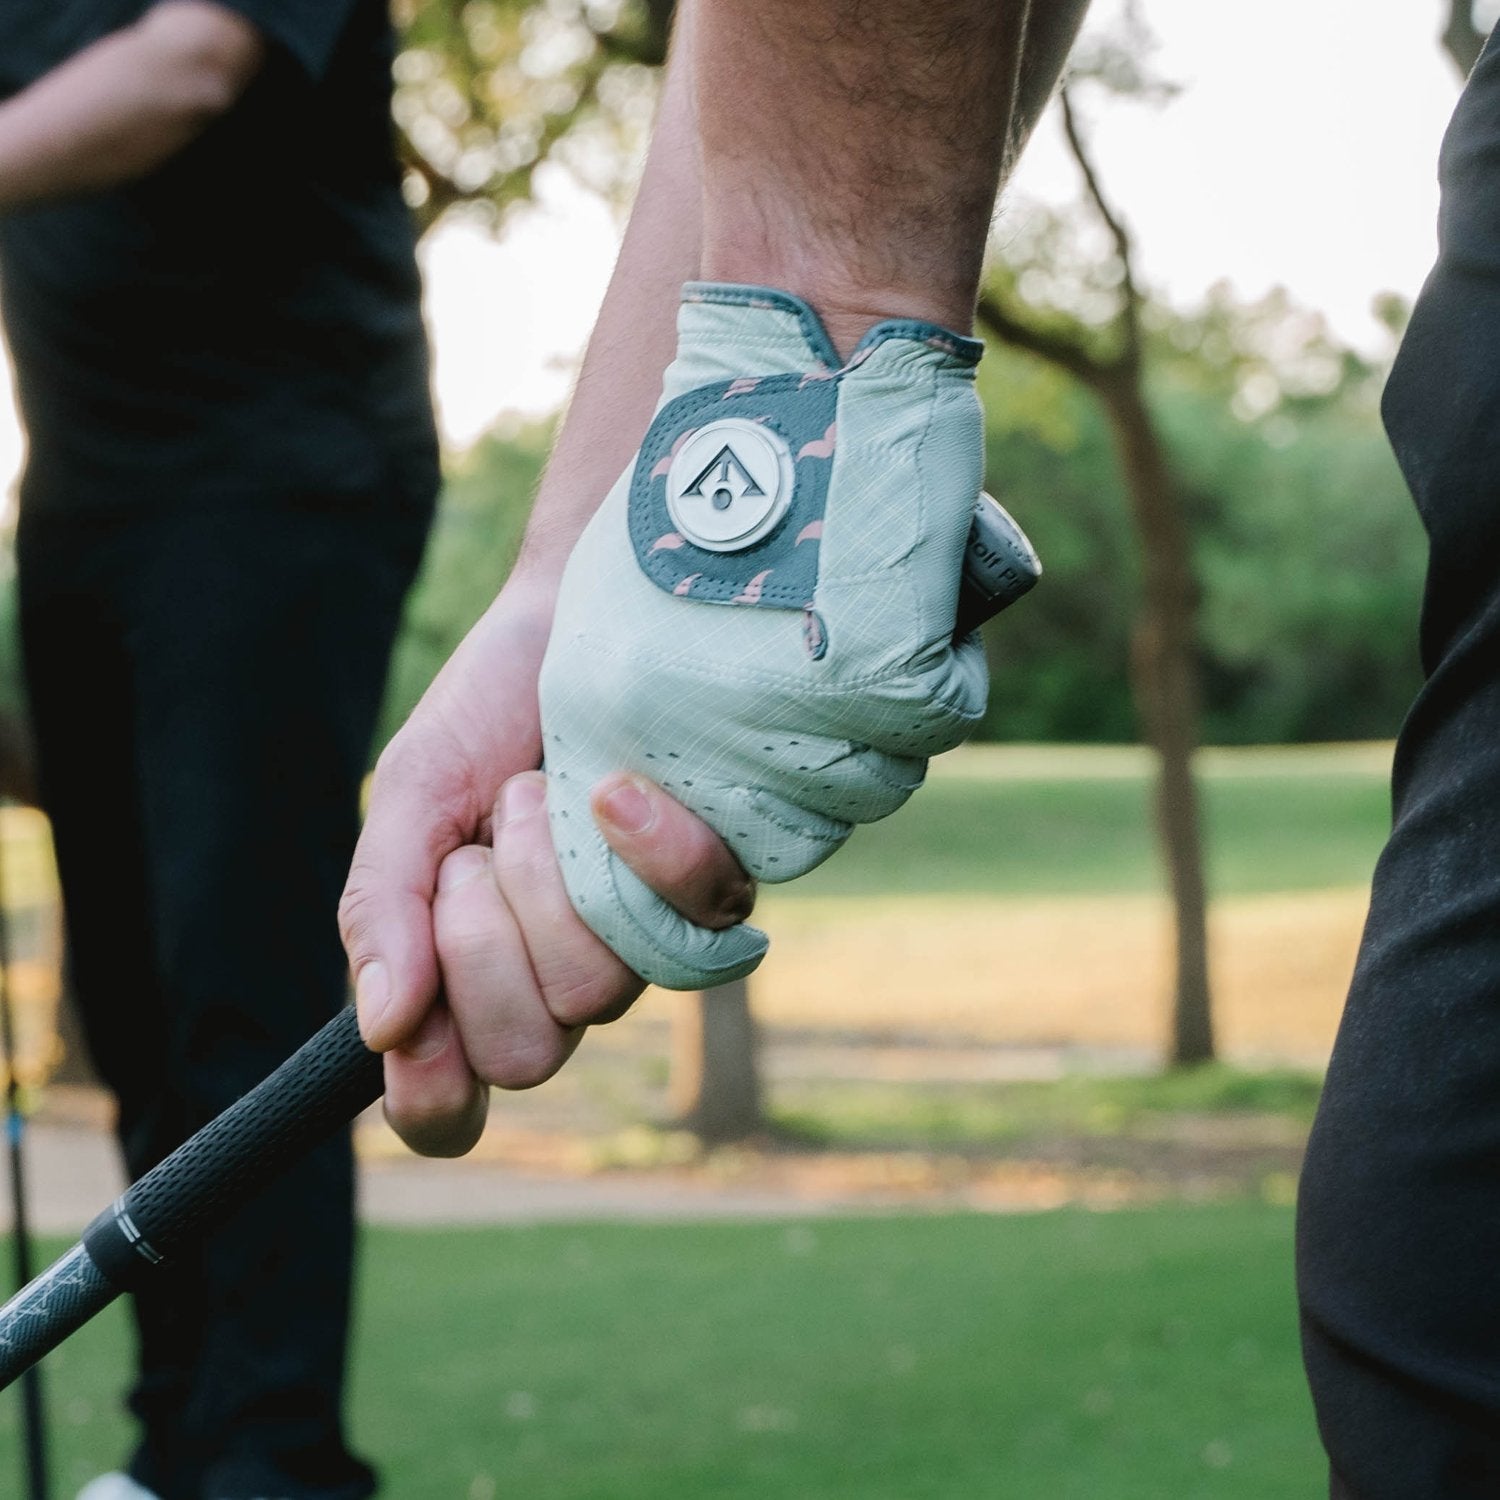 Close up image of men's gray golf glove with magnetic ball marker holding a golf club with an interlock grip on the teebox.